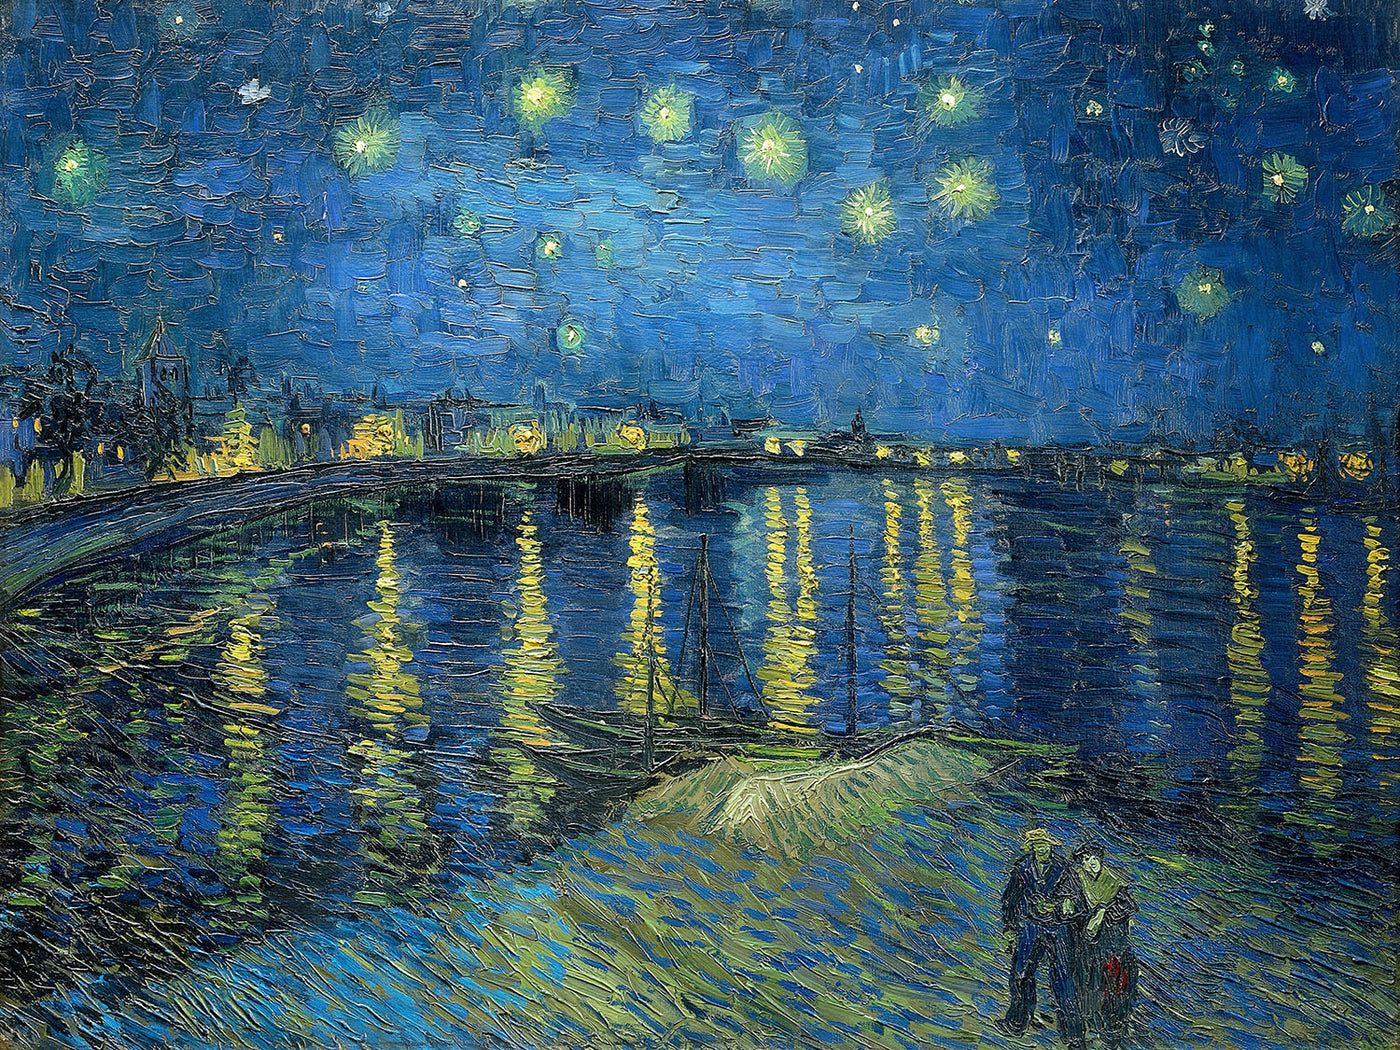 Starry Night over the Rhone by Vincent van Gogh, 1888